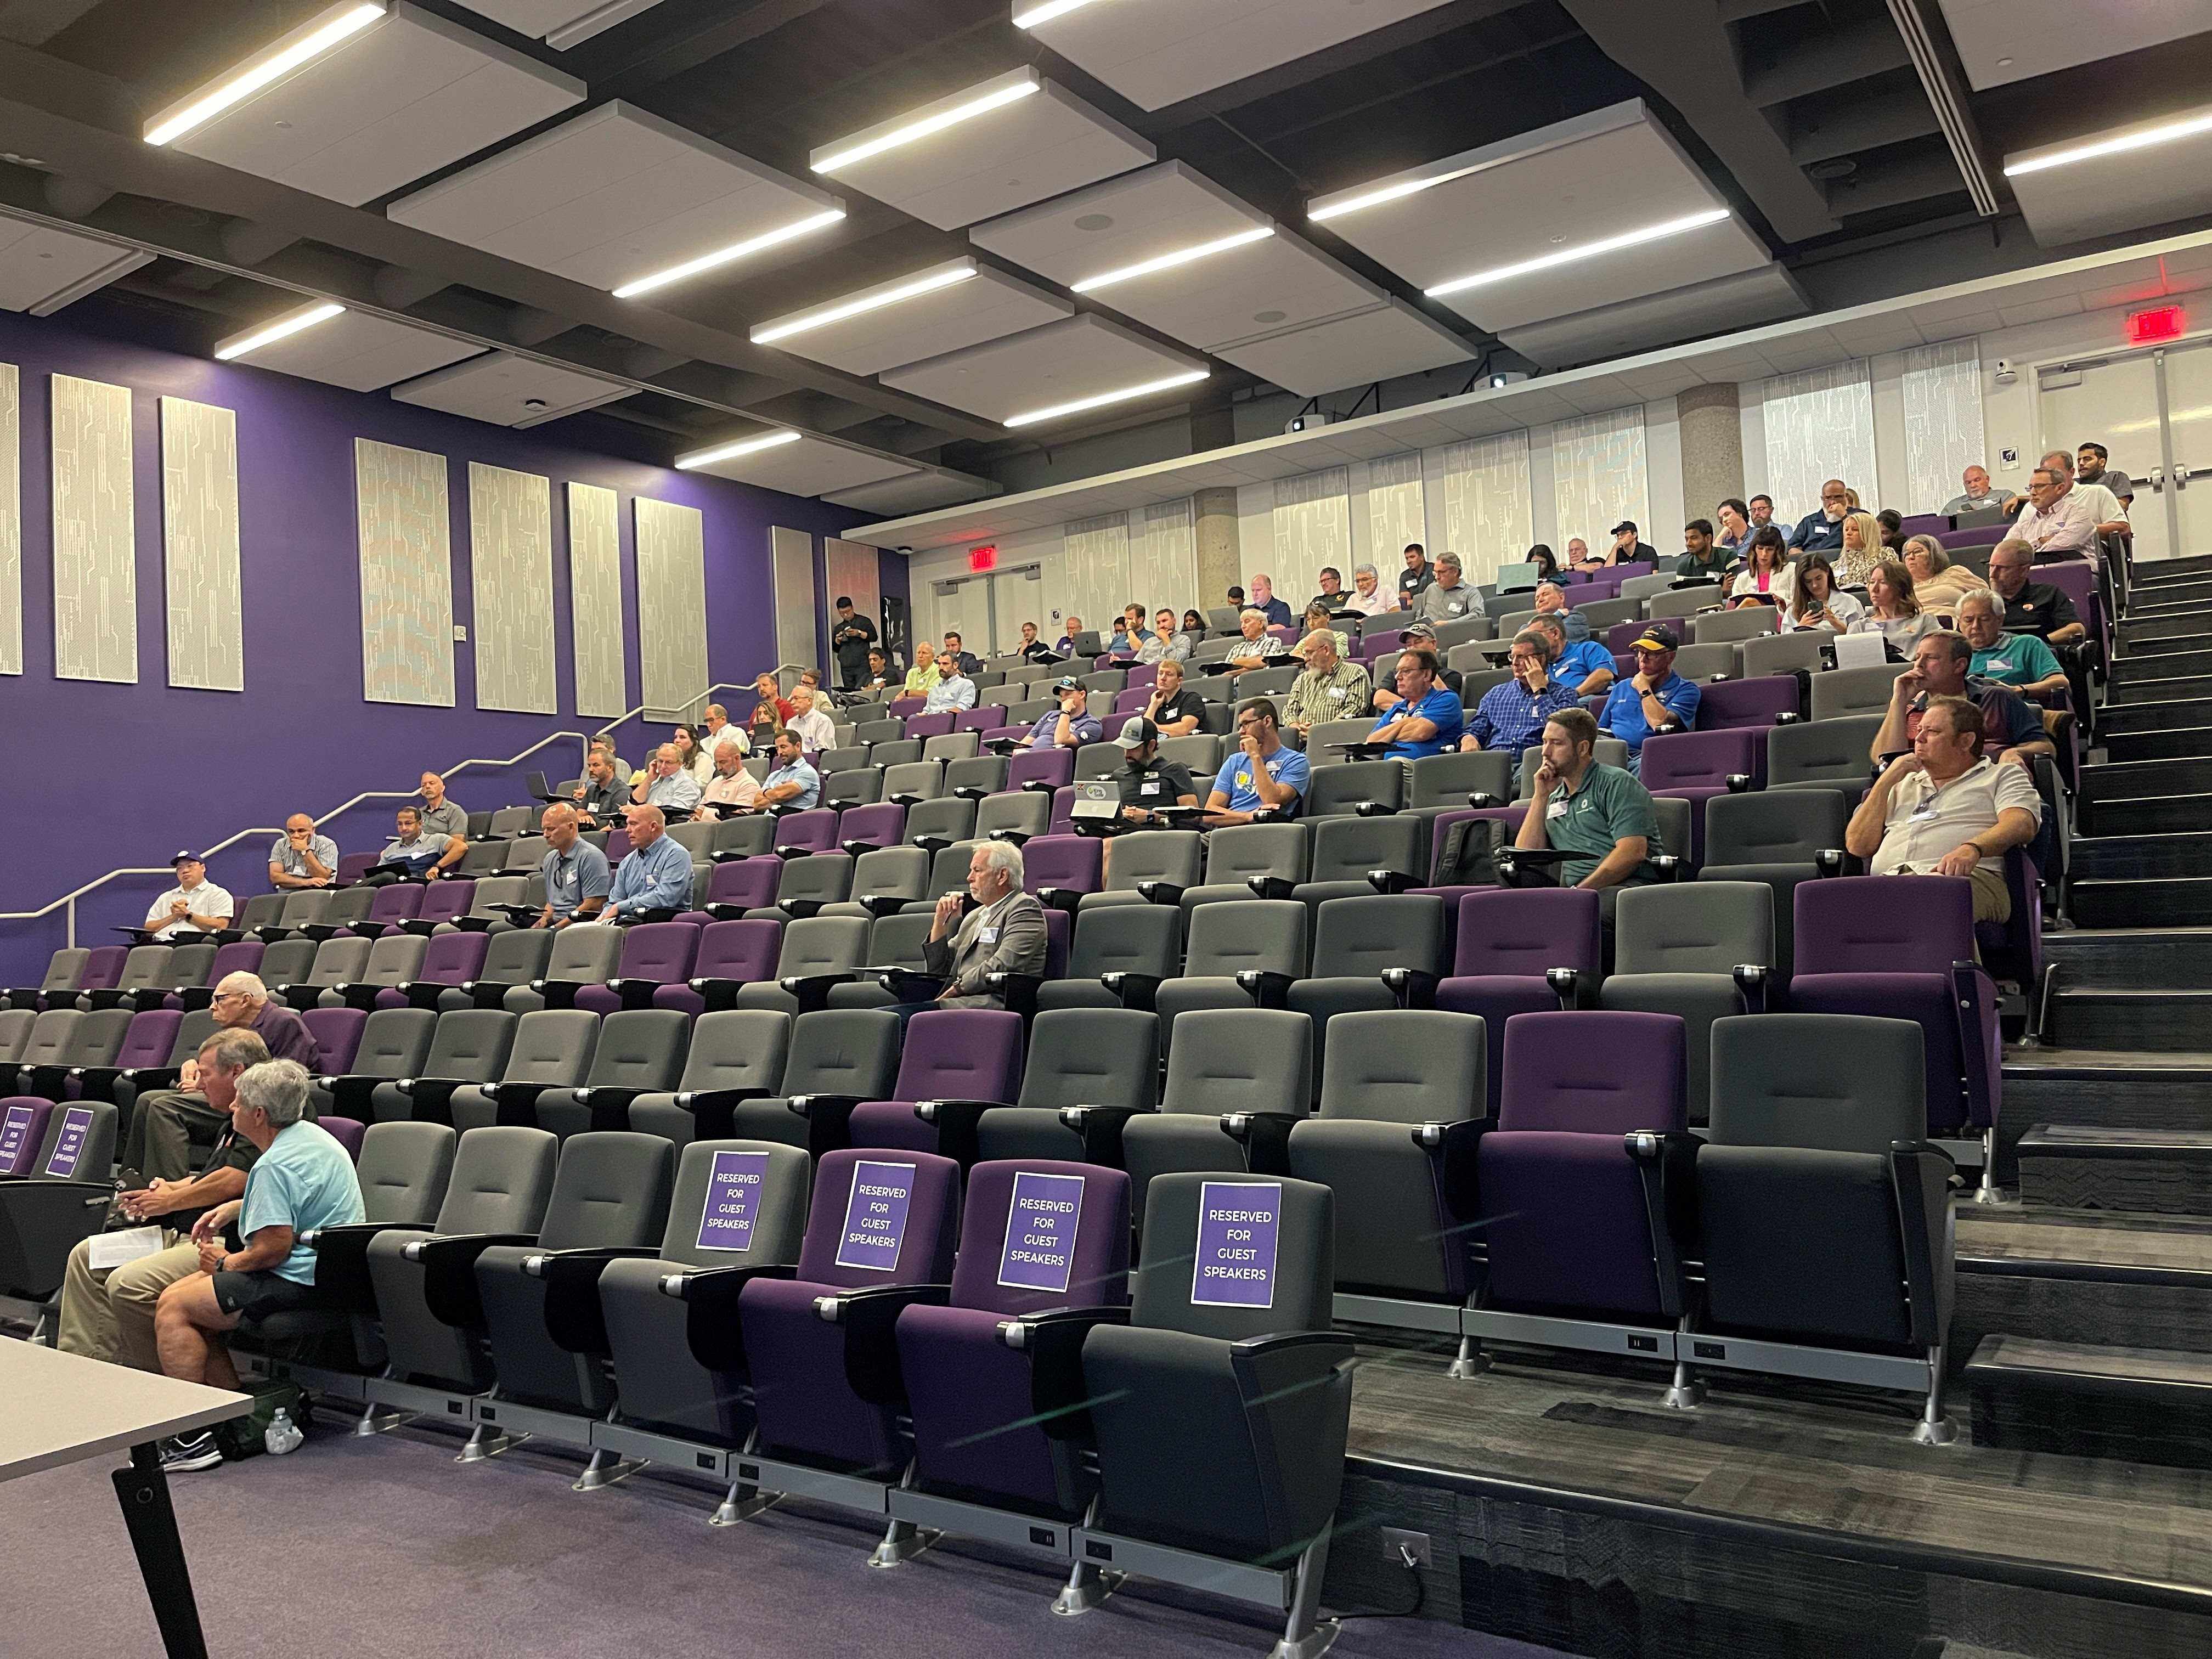 Symposium attendees in lecture hall